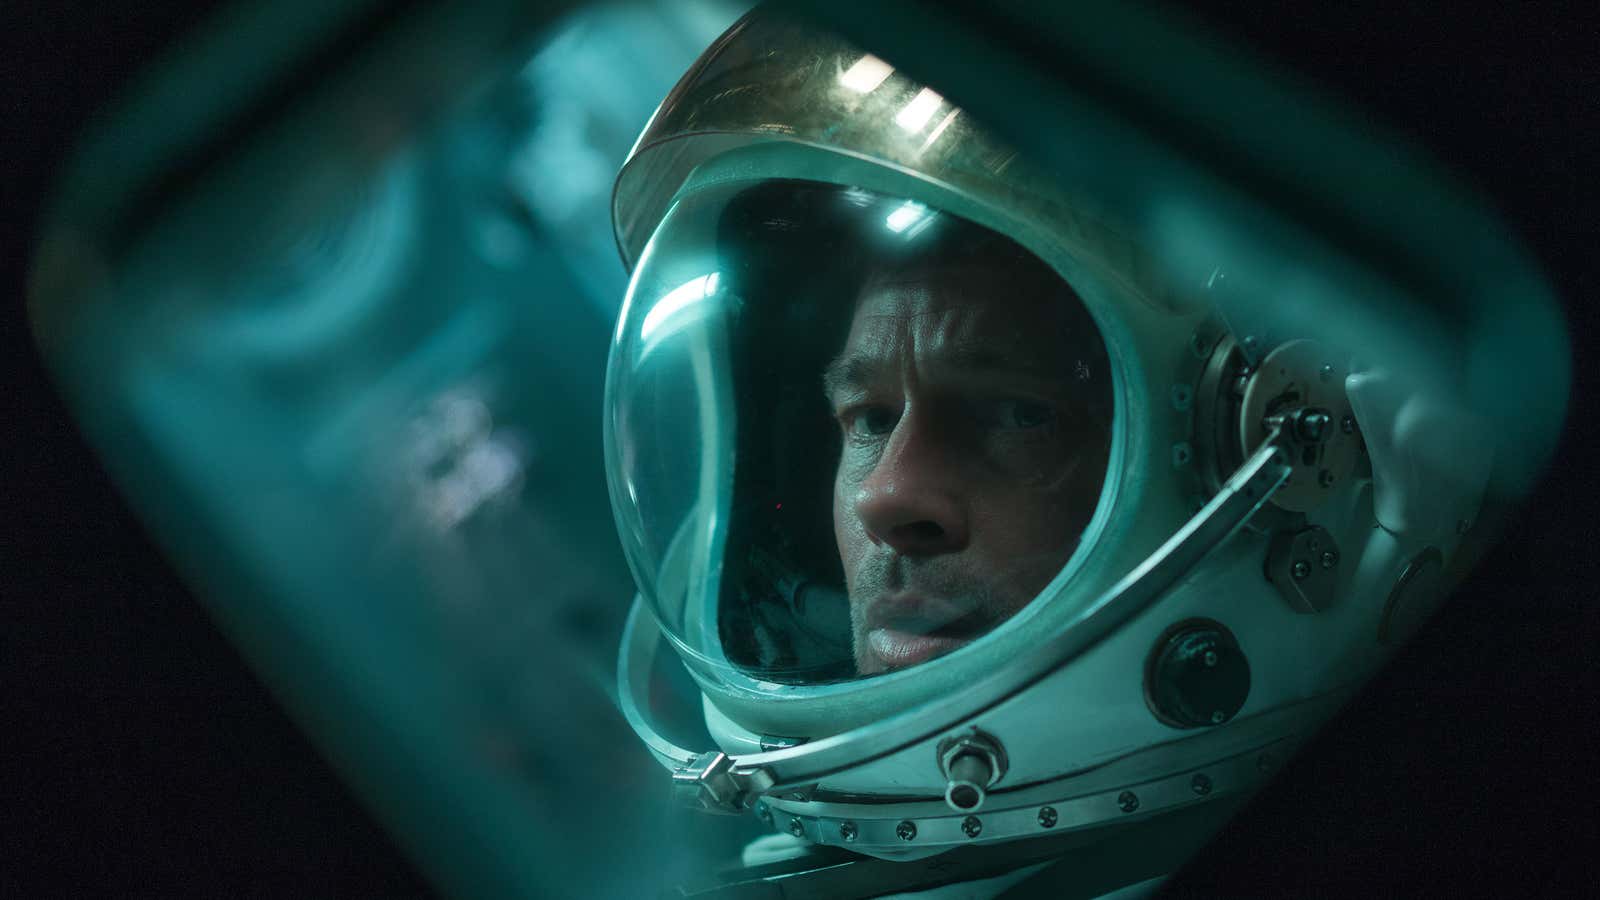 Brad Pitt journeys into inner and outer space in James Gray’s sci-fi stunner <i>Ad Astra</i>